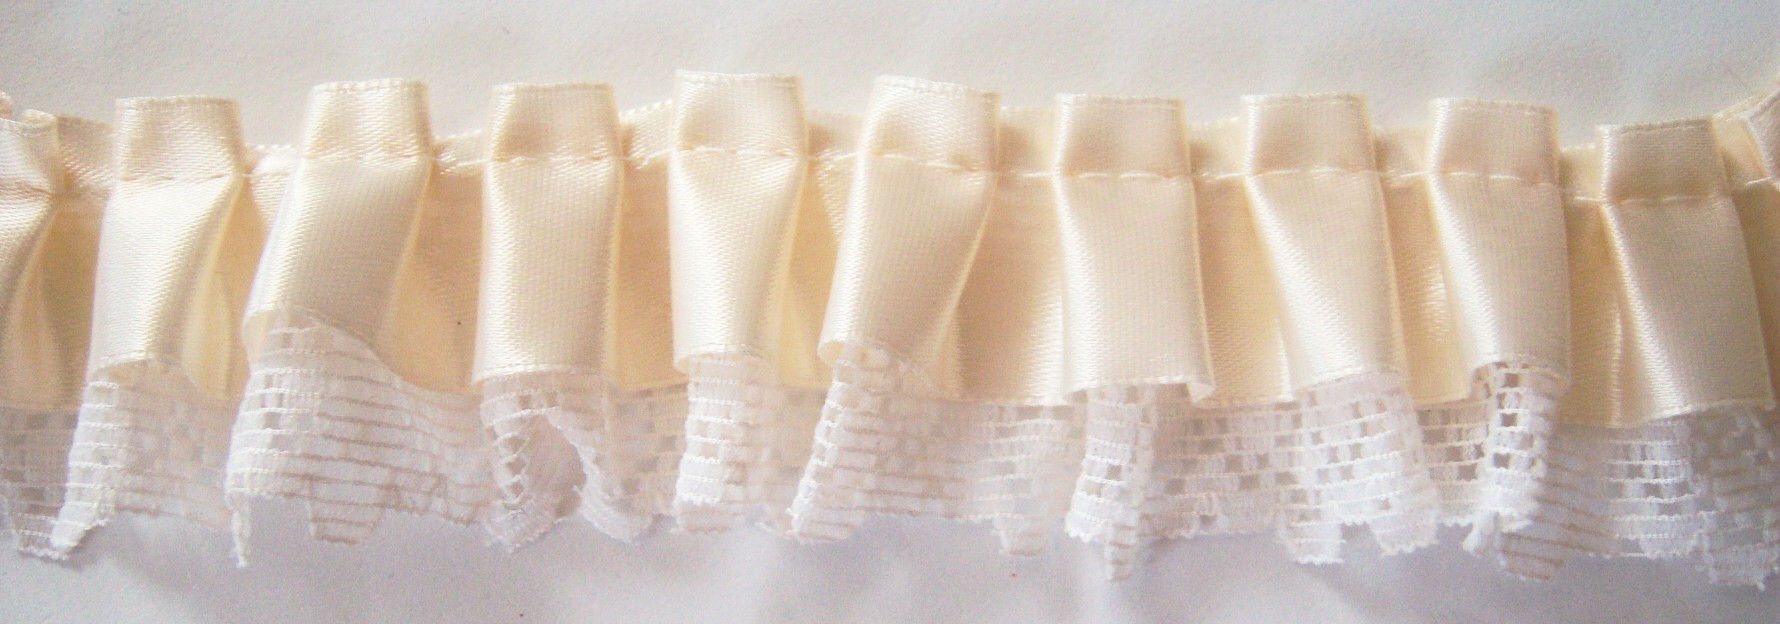 Lt Ivory Satin/White 1 1/2" Pleated Lace